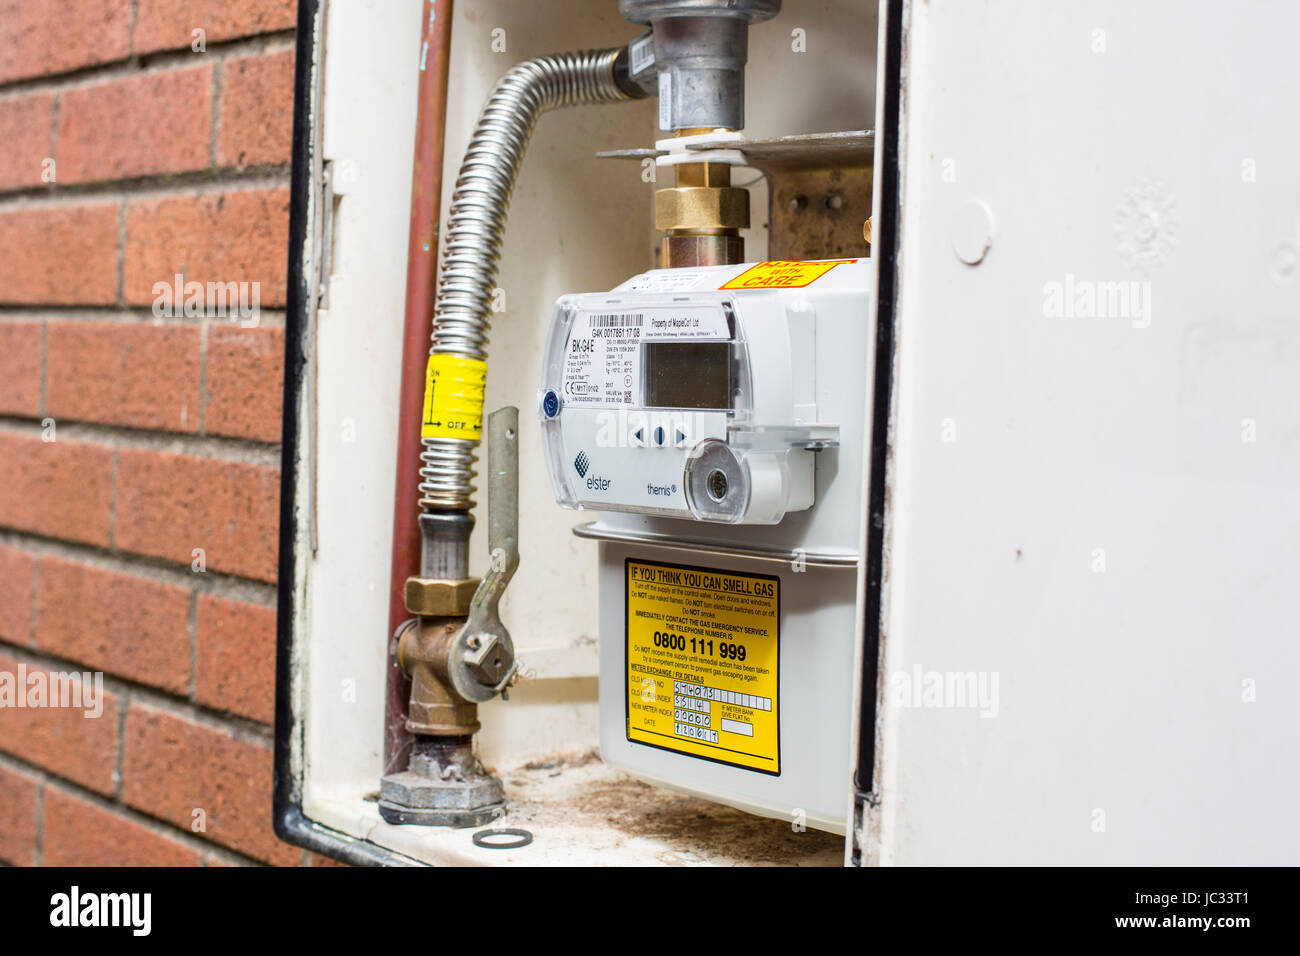 an-external-gas-meter-with-a-smart-meter-attached-stock-photo-alamy